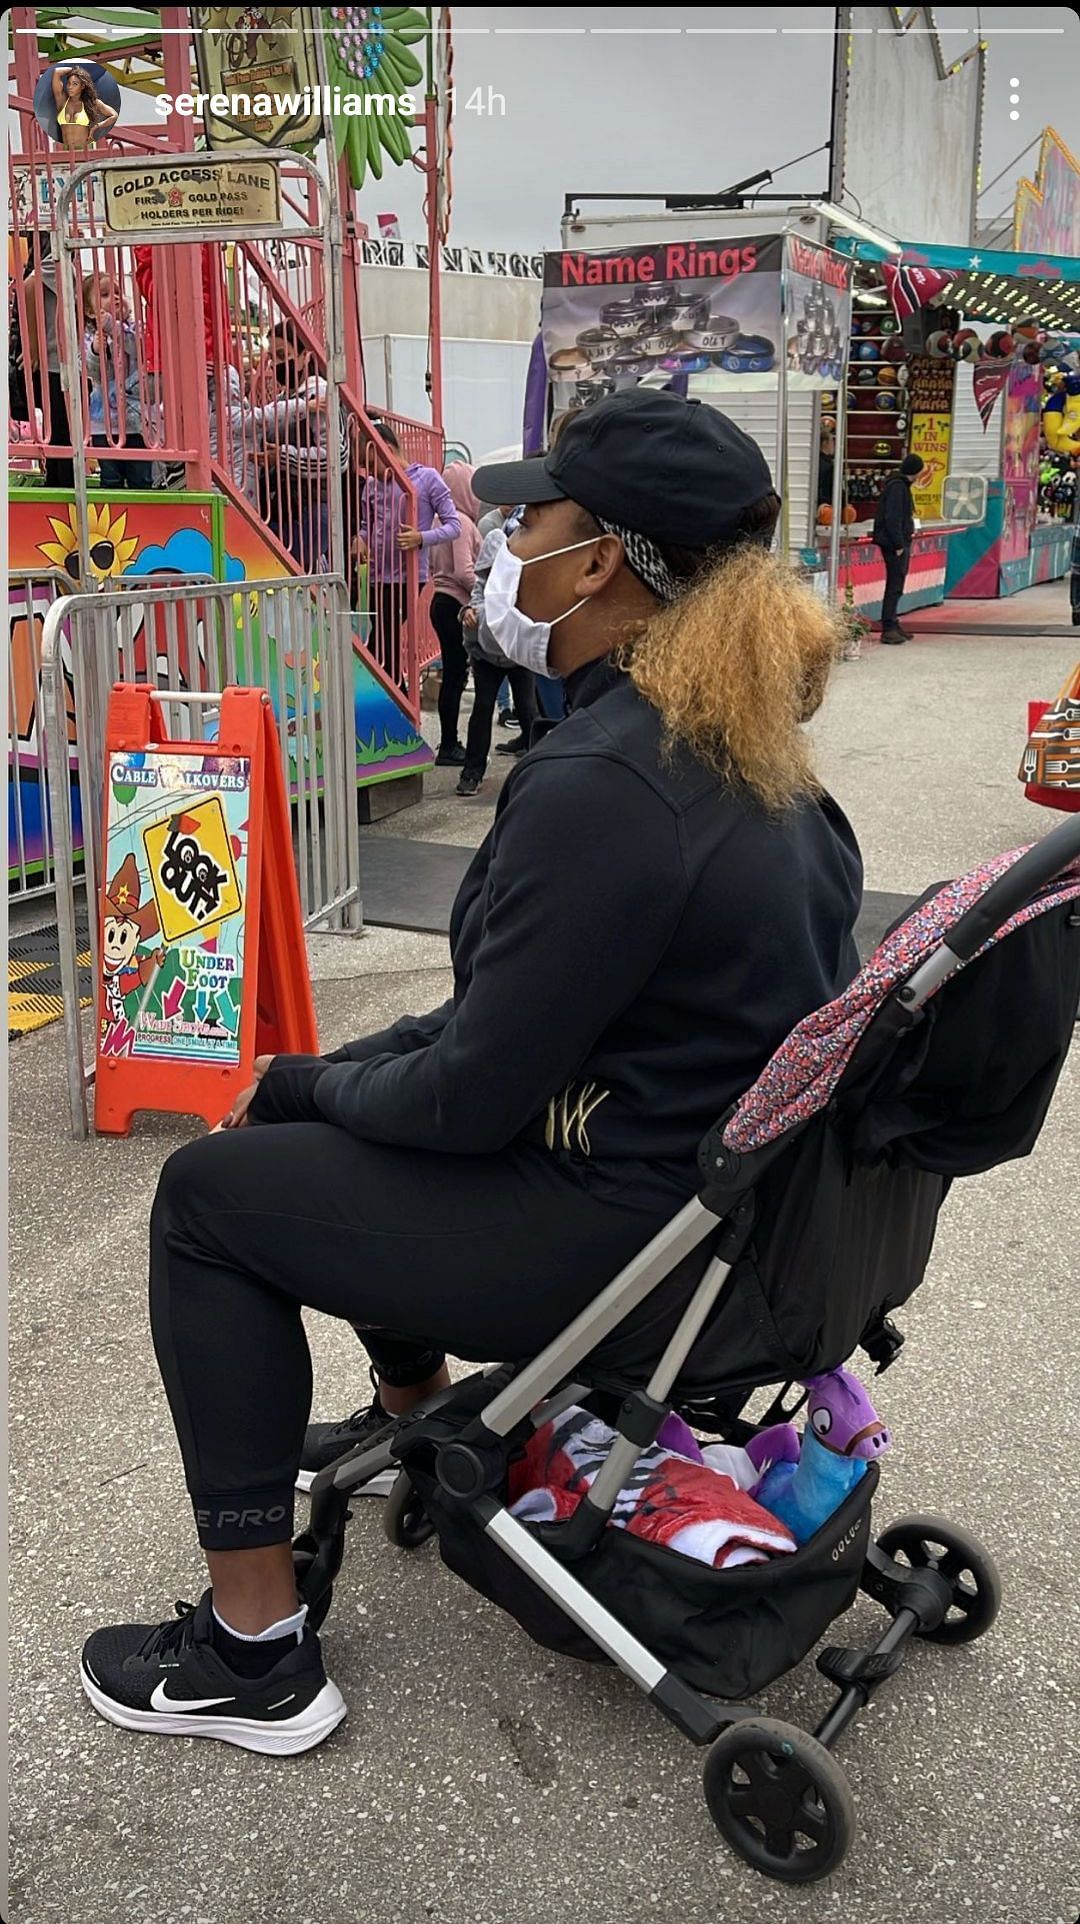 Serena Williams at the fair, as posted on her Instagram story